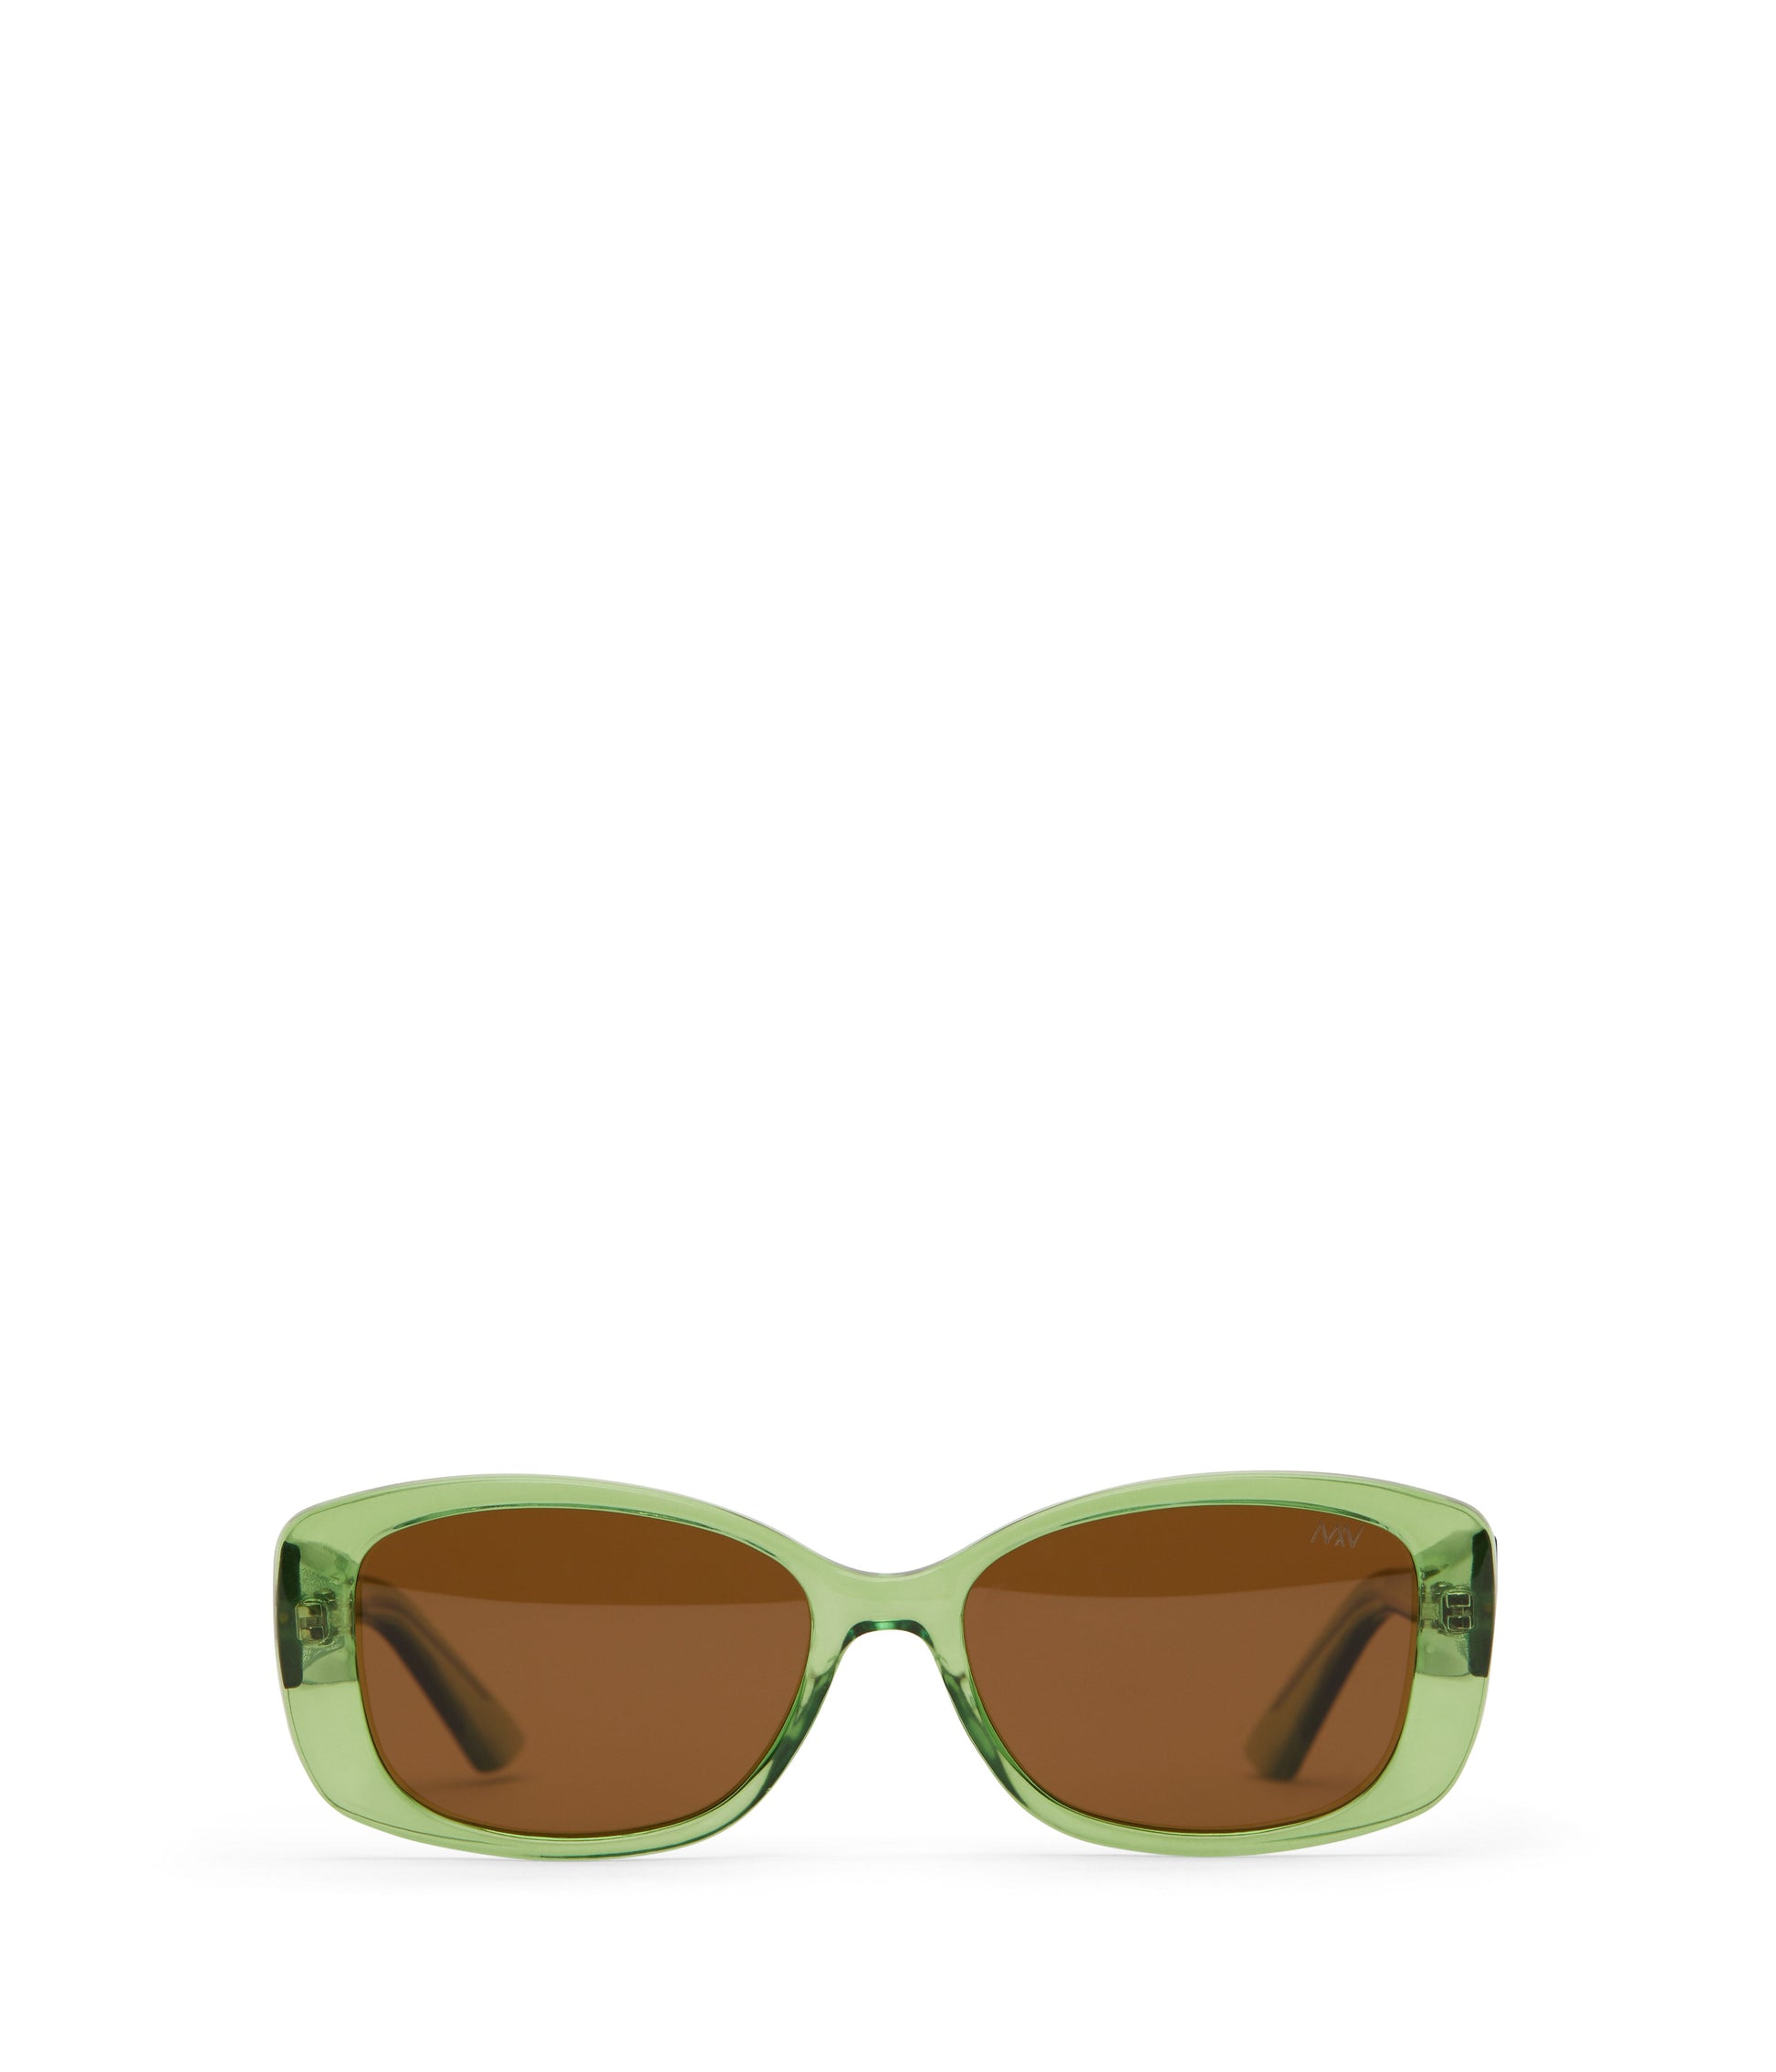 NORR Square Sunglasses | Color: Green - variant::green